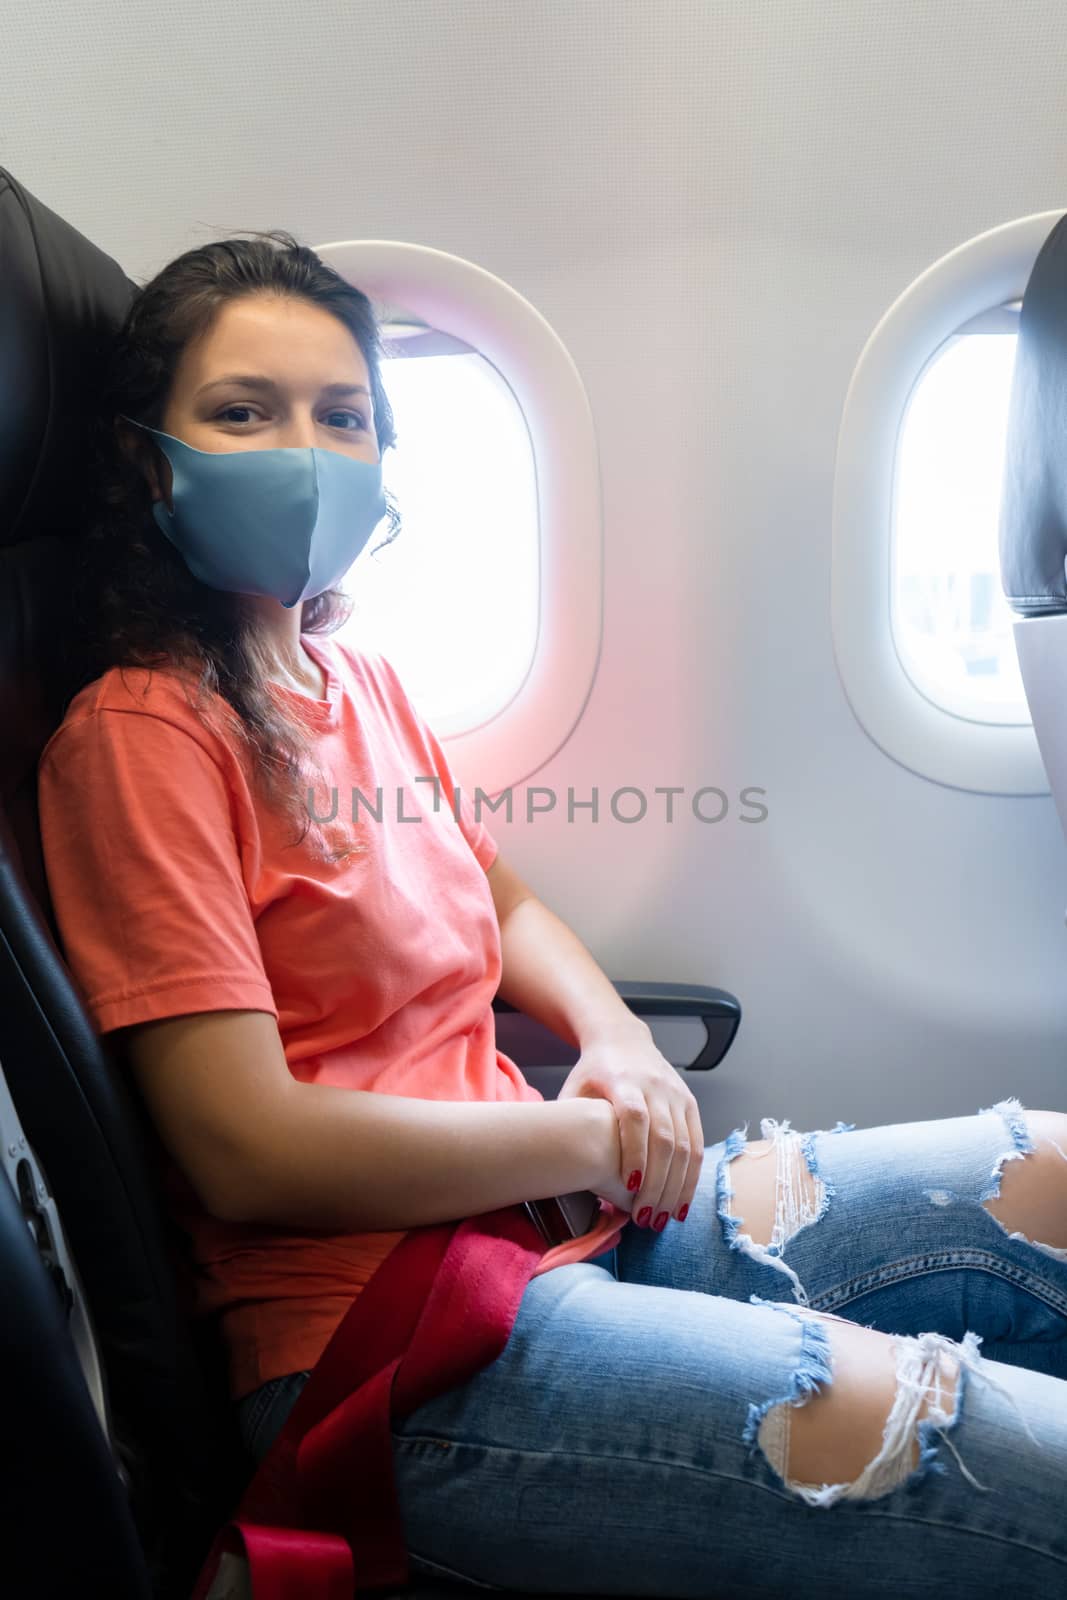 A girl in a medical mask on her face during a flight in the cabin. Air travel during a pandemic.